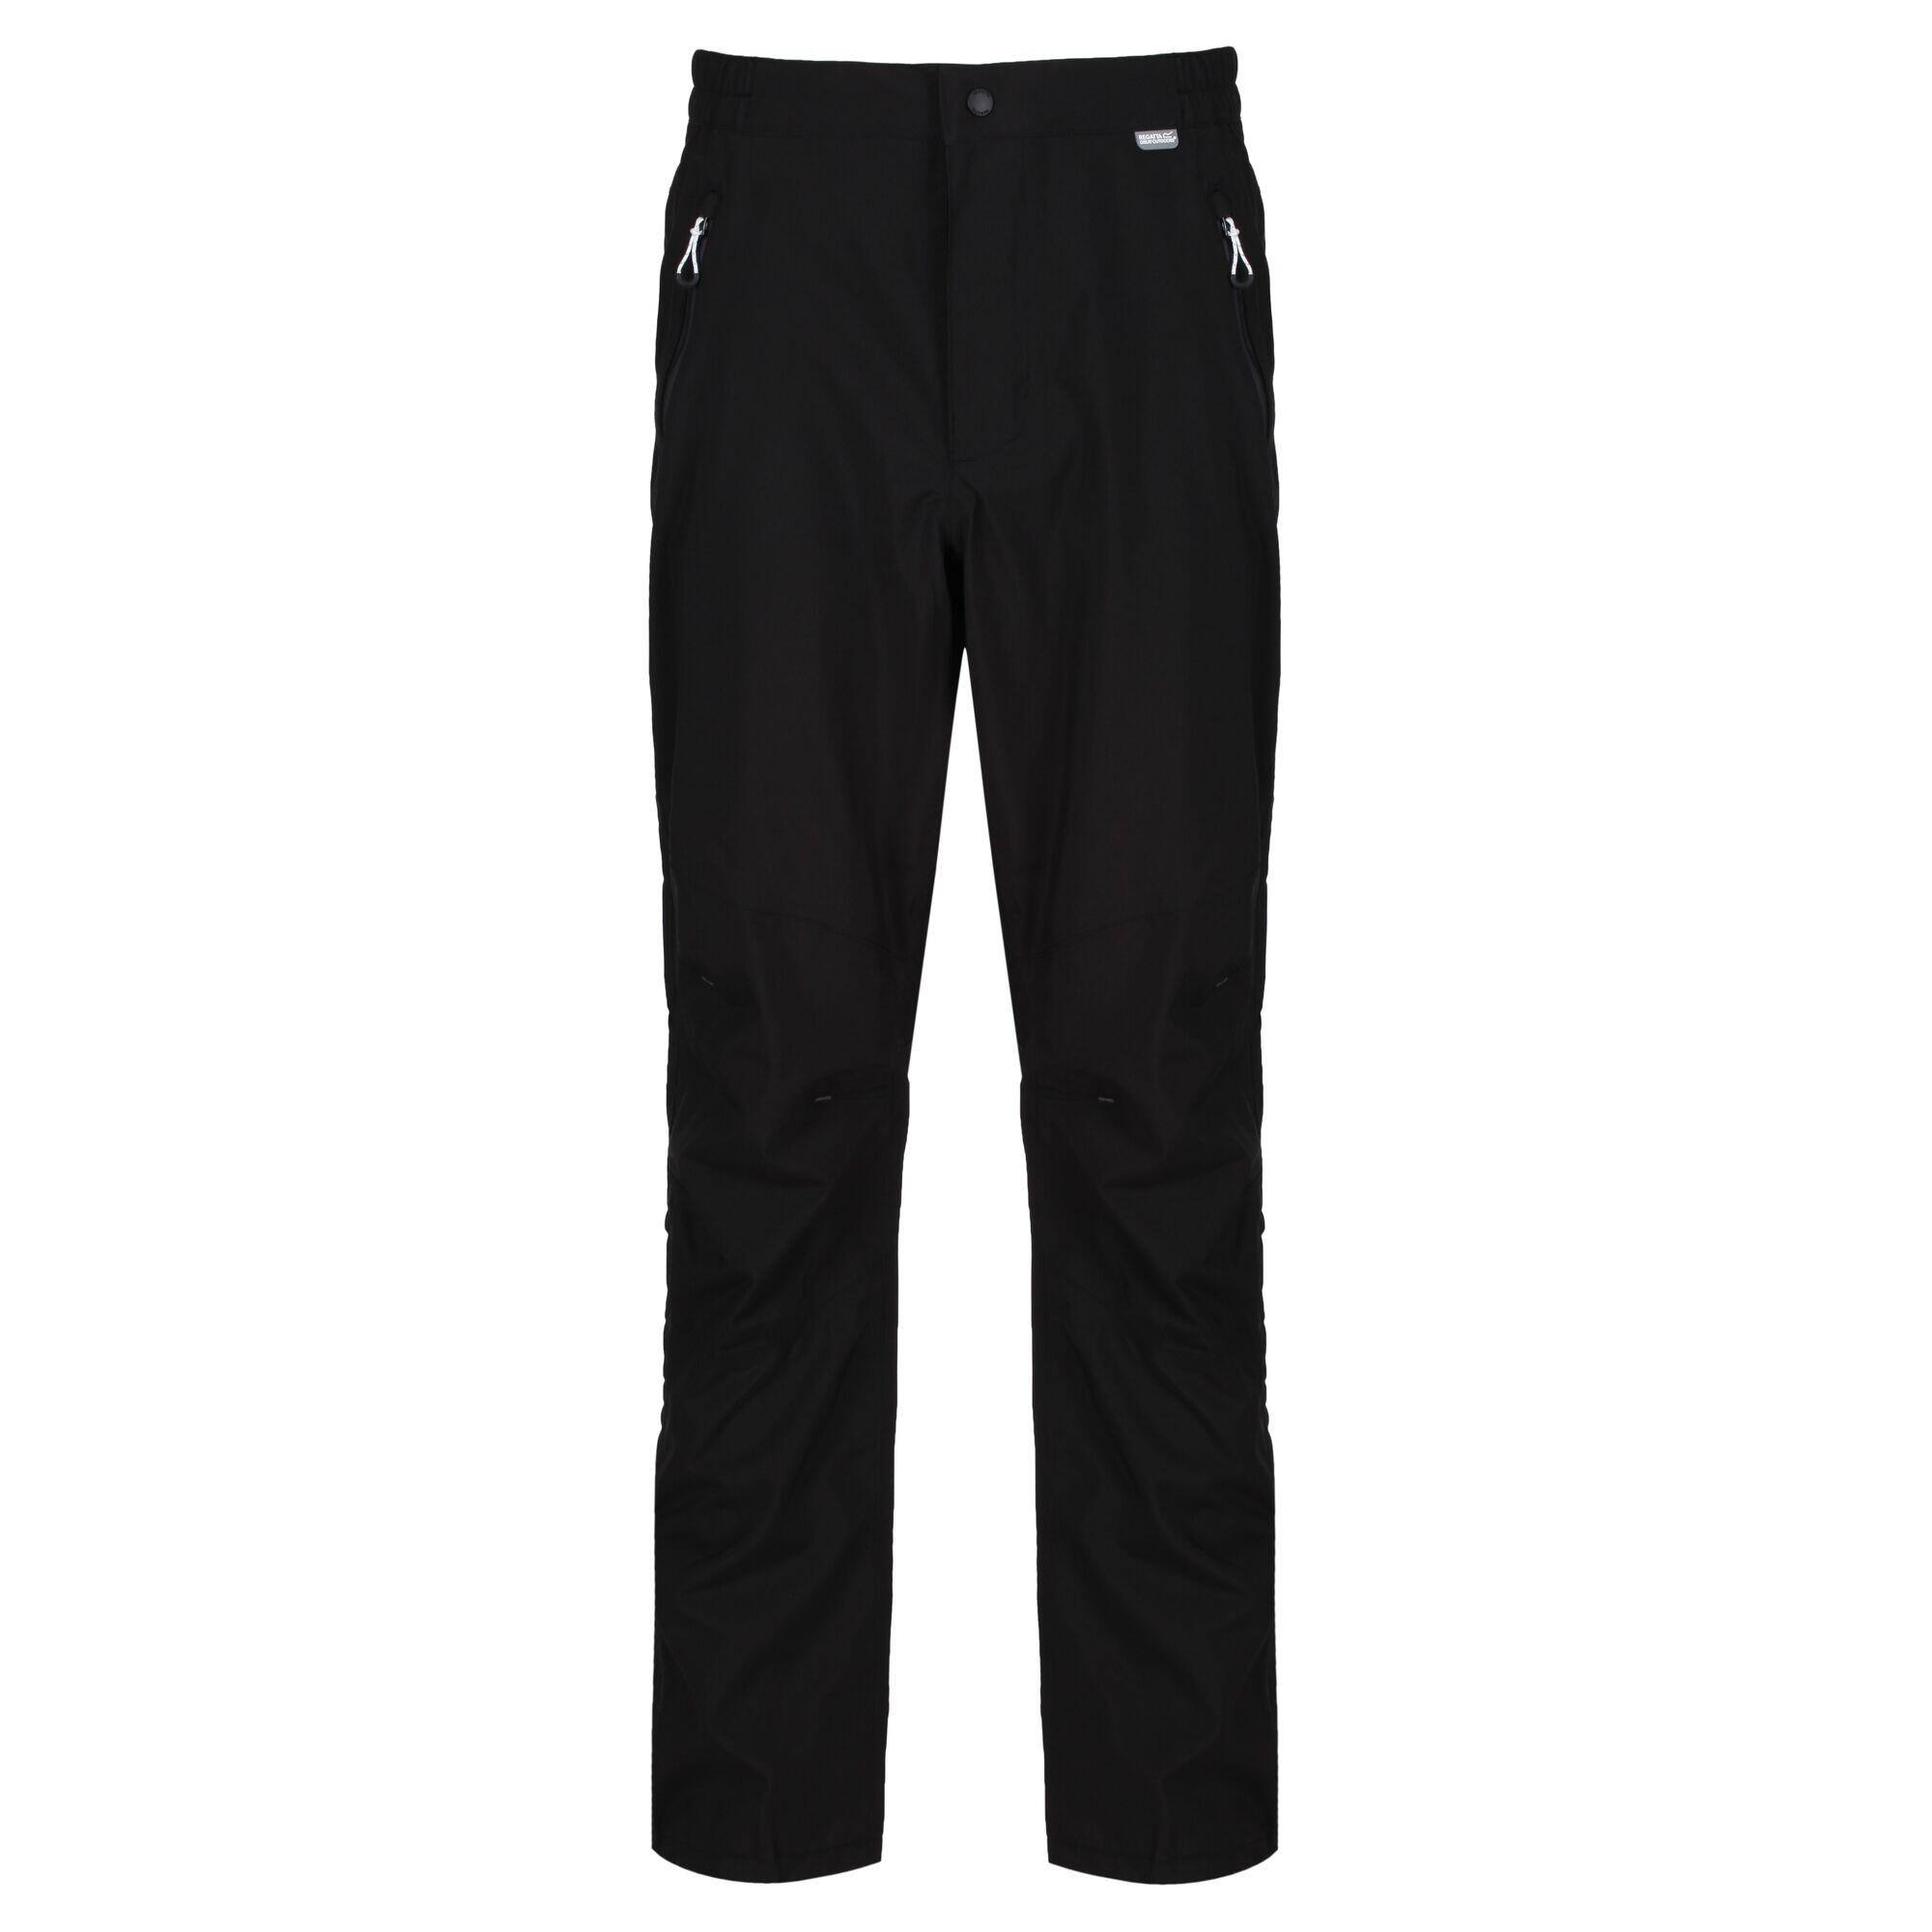 Highton Stretch Men's Hiking Overtrousers - Black 5/5